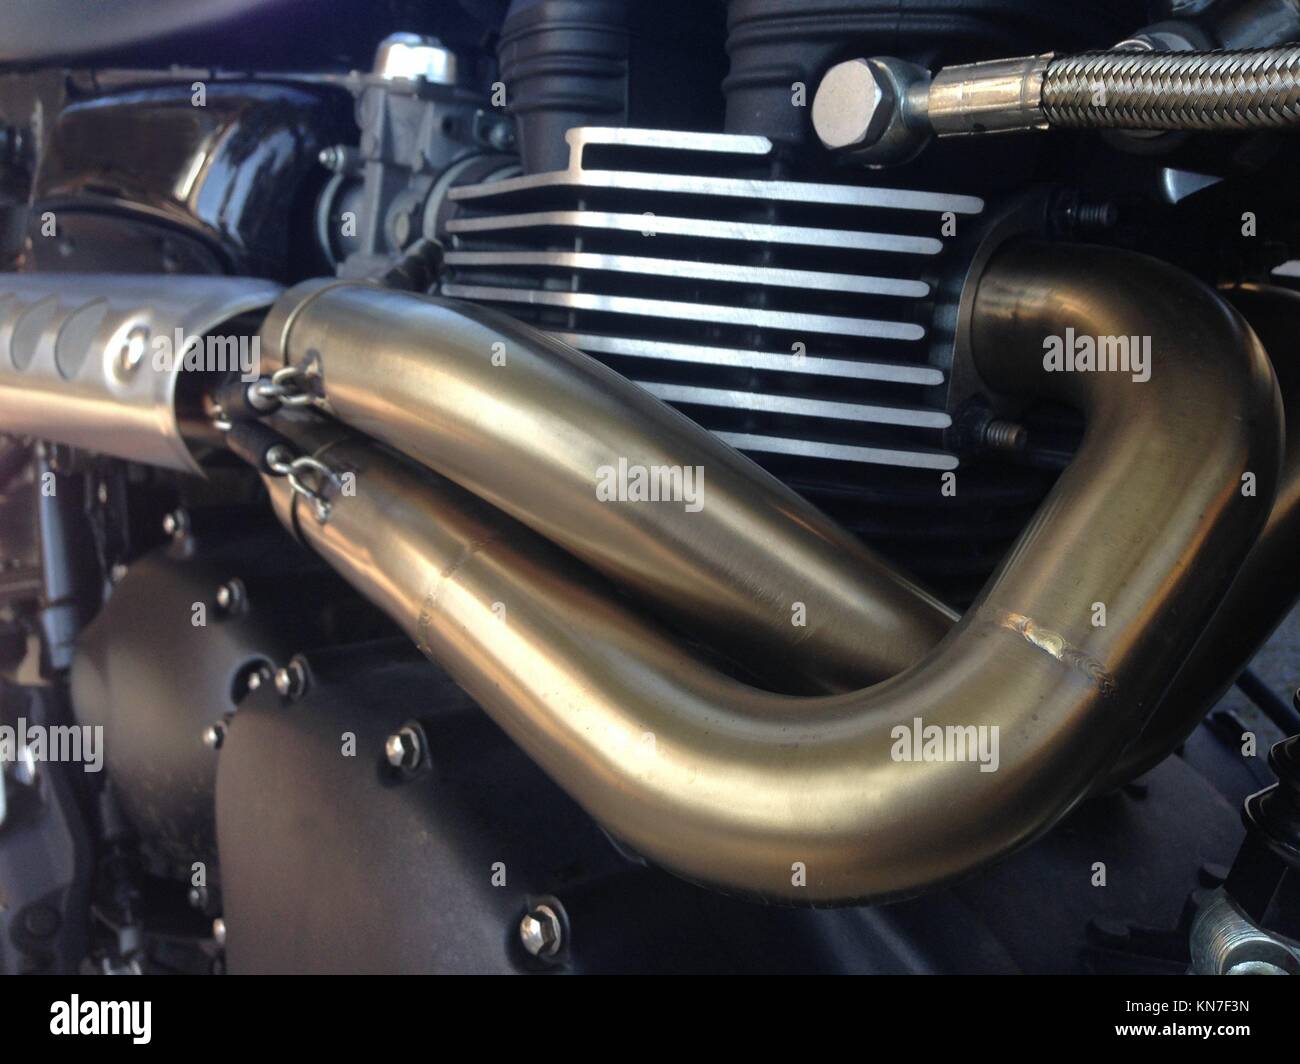 Close up view of a shiny motorcycle engine. Stock Photo